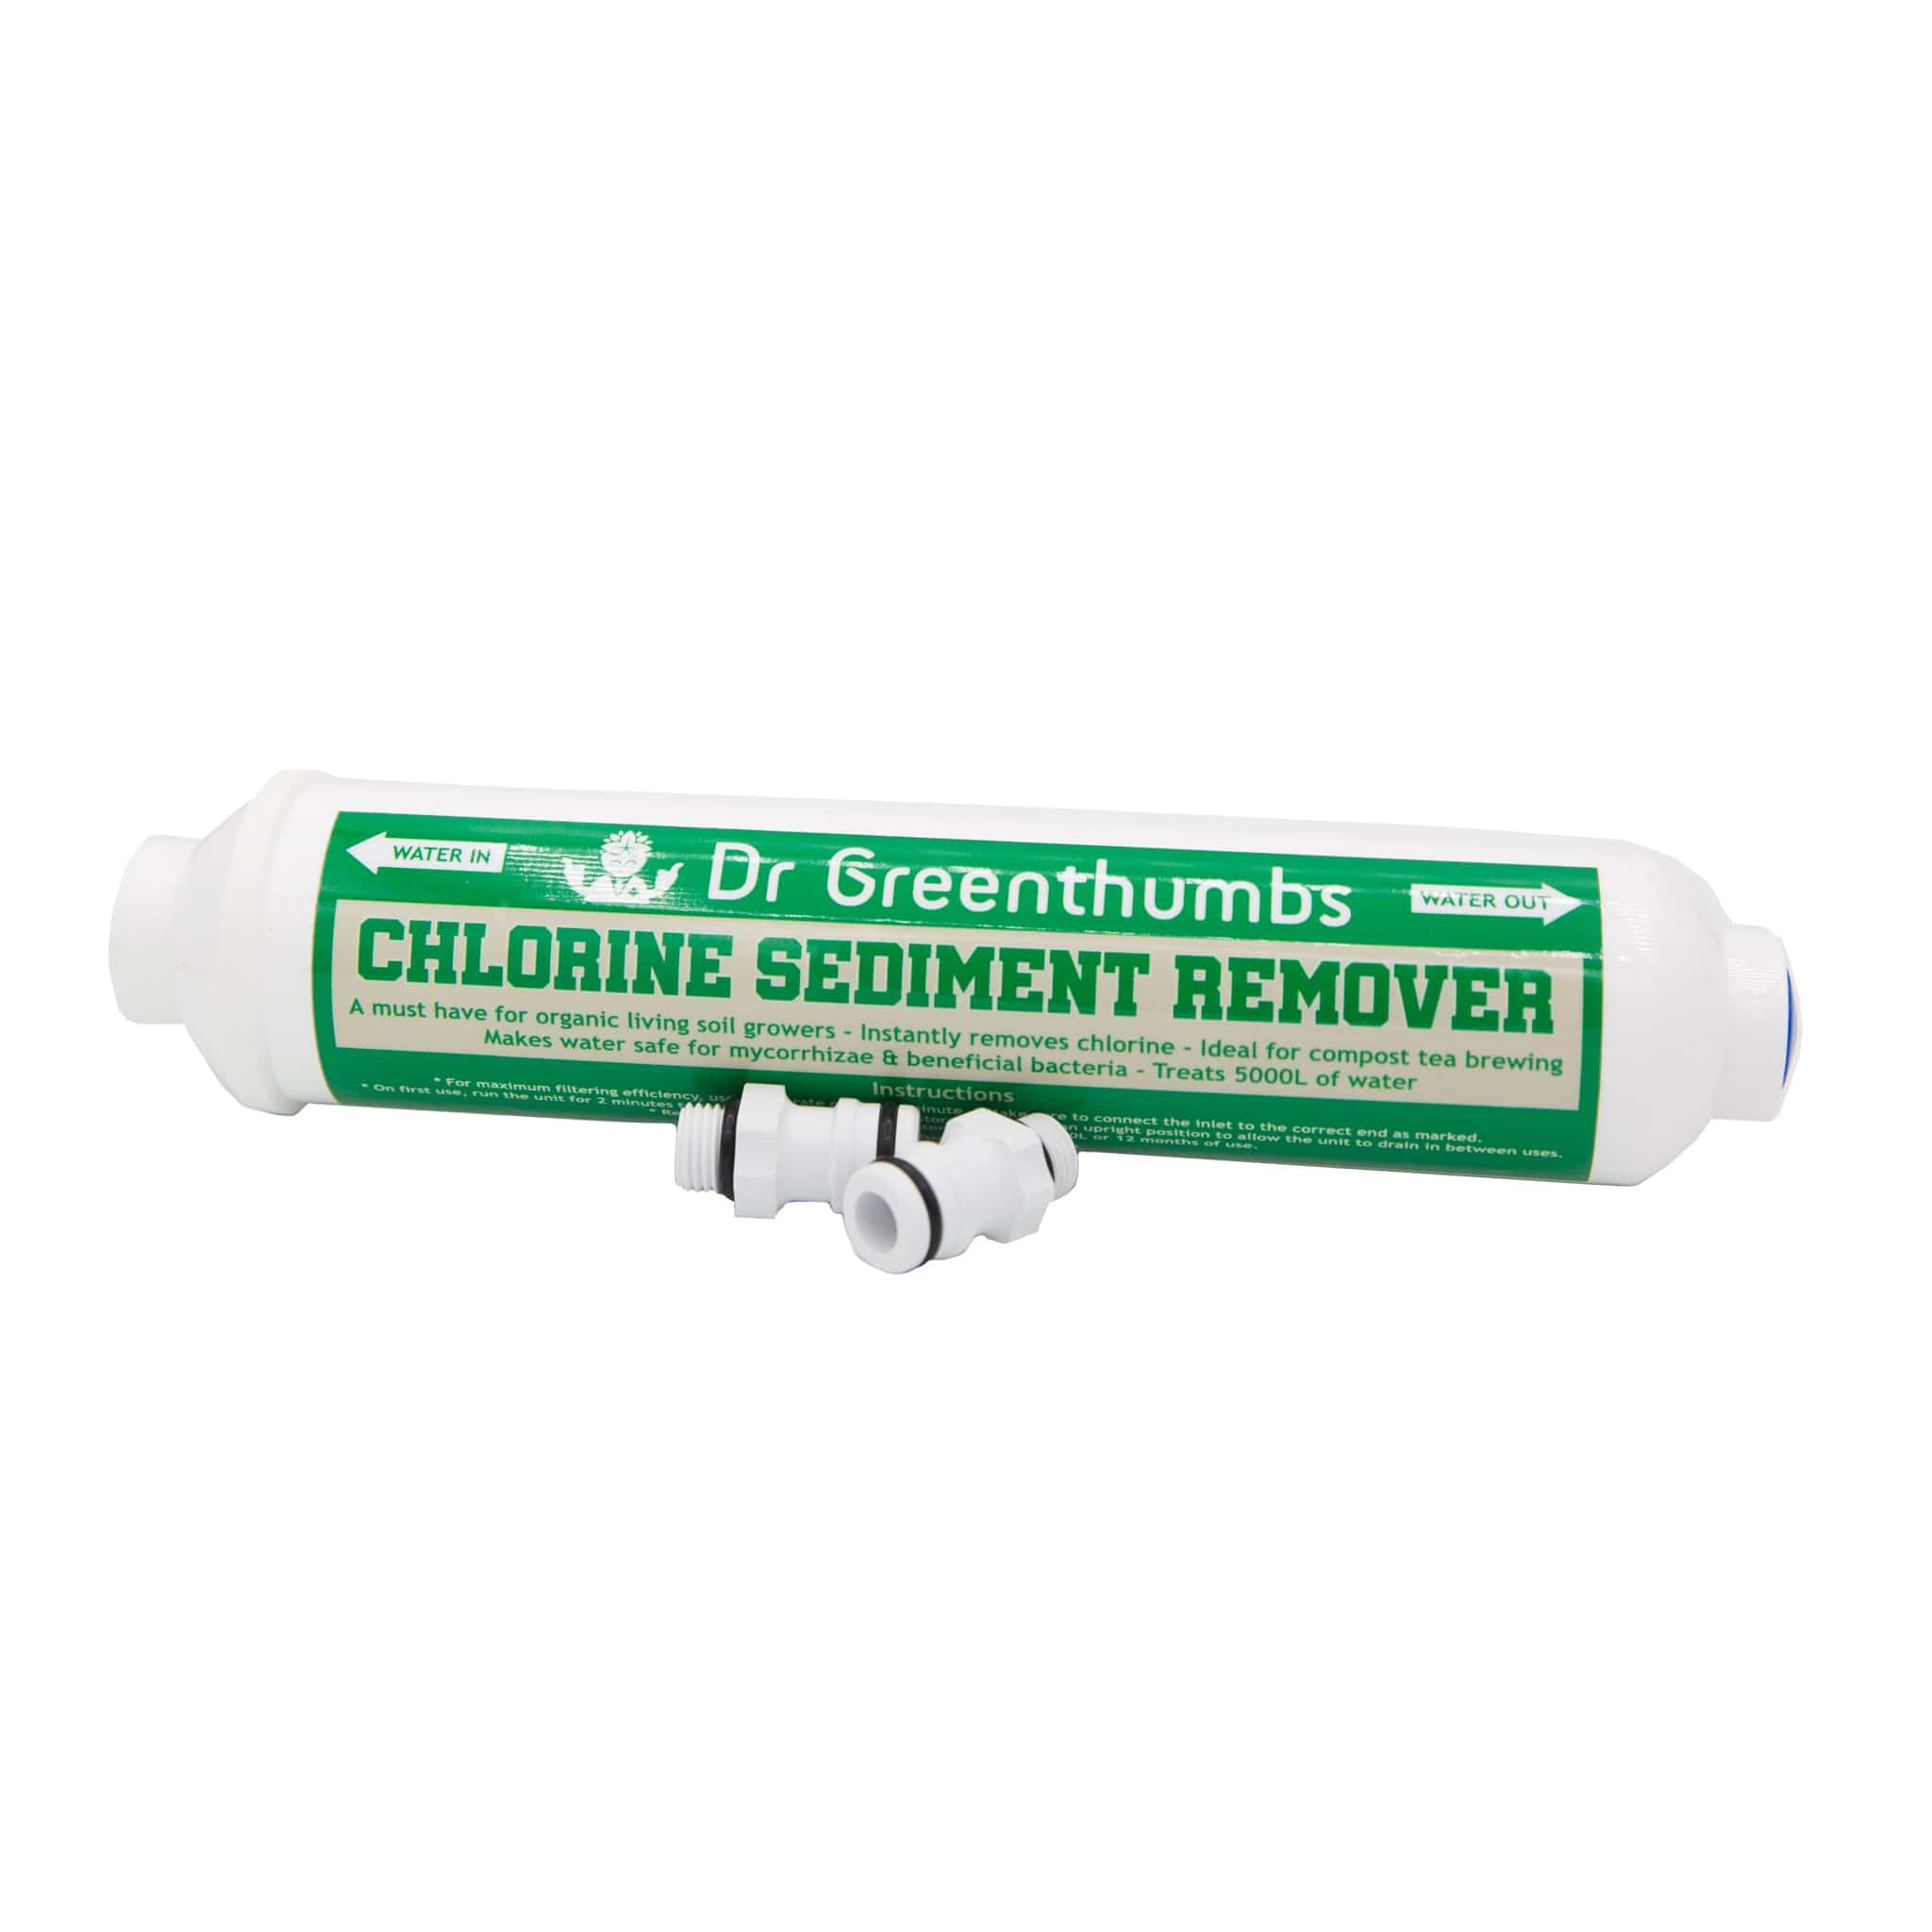 Dr Greenthumbs Chlorine & Sediment Remover (10" / 12" Options)